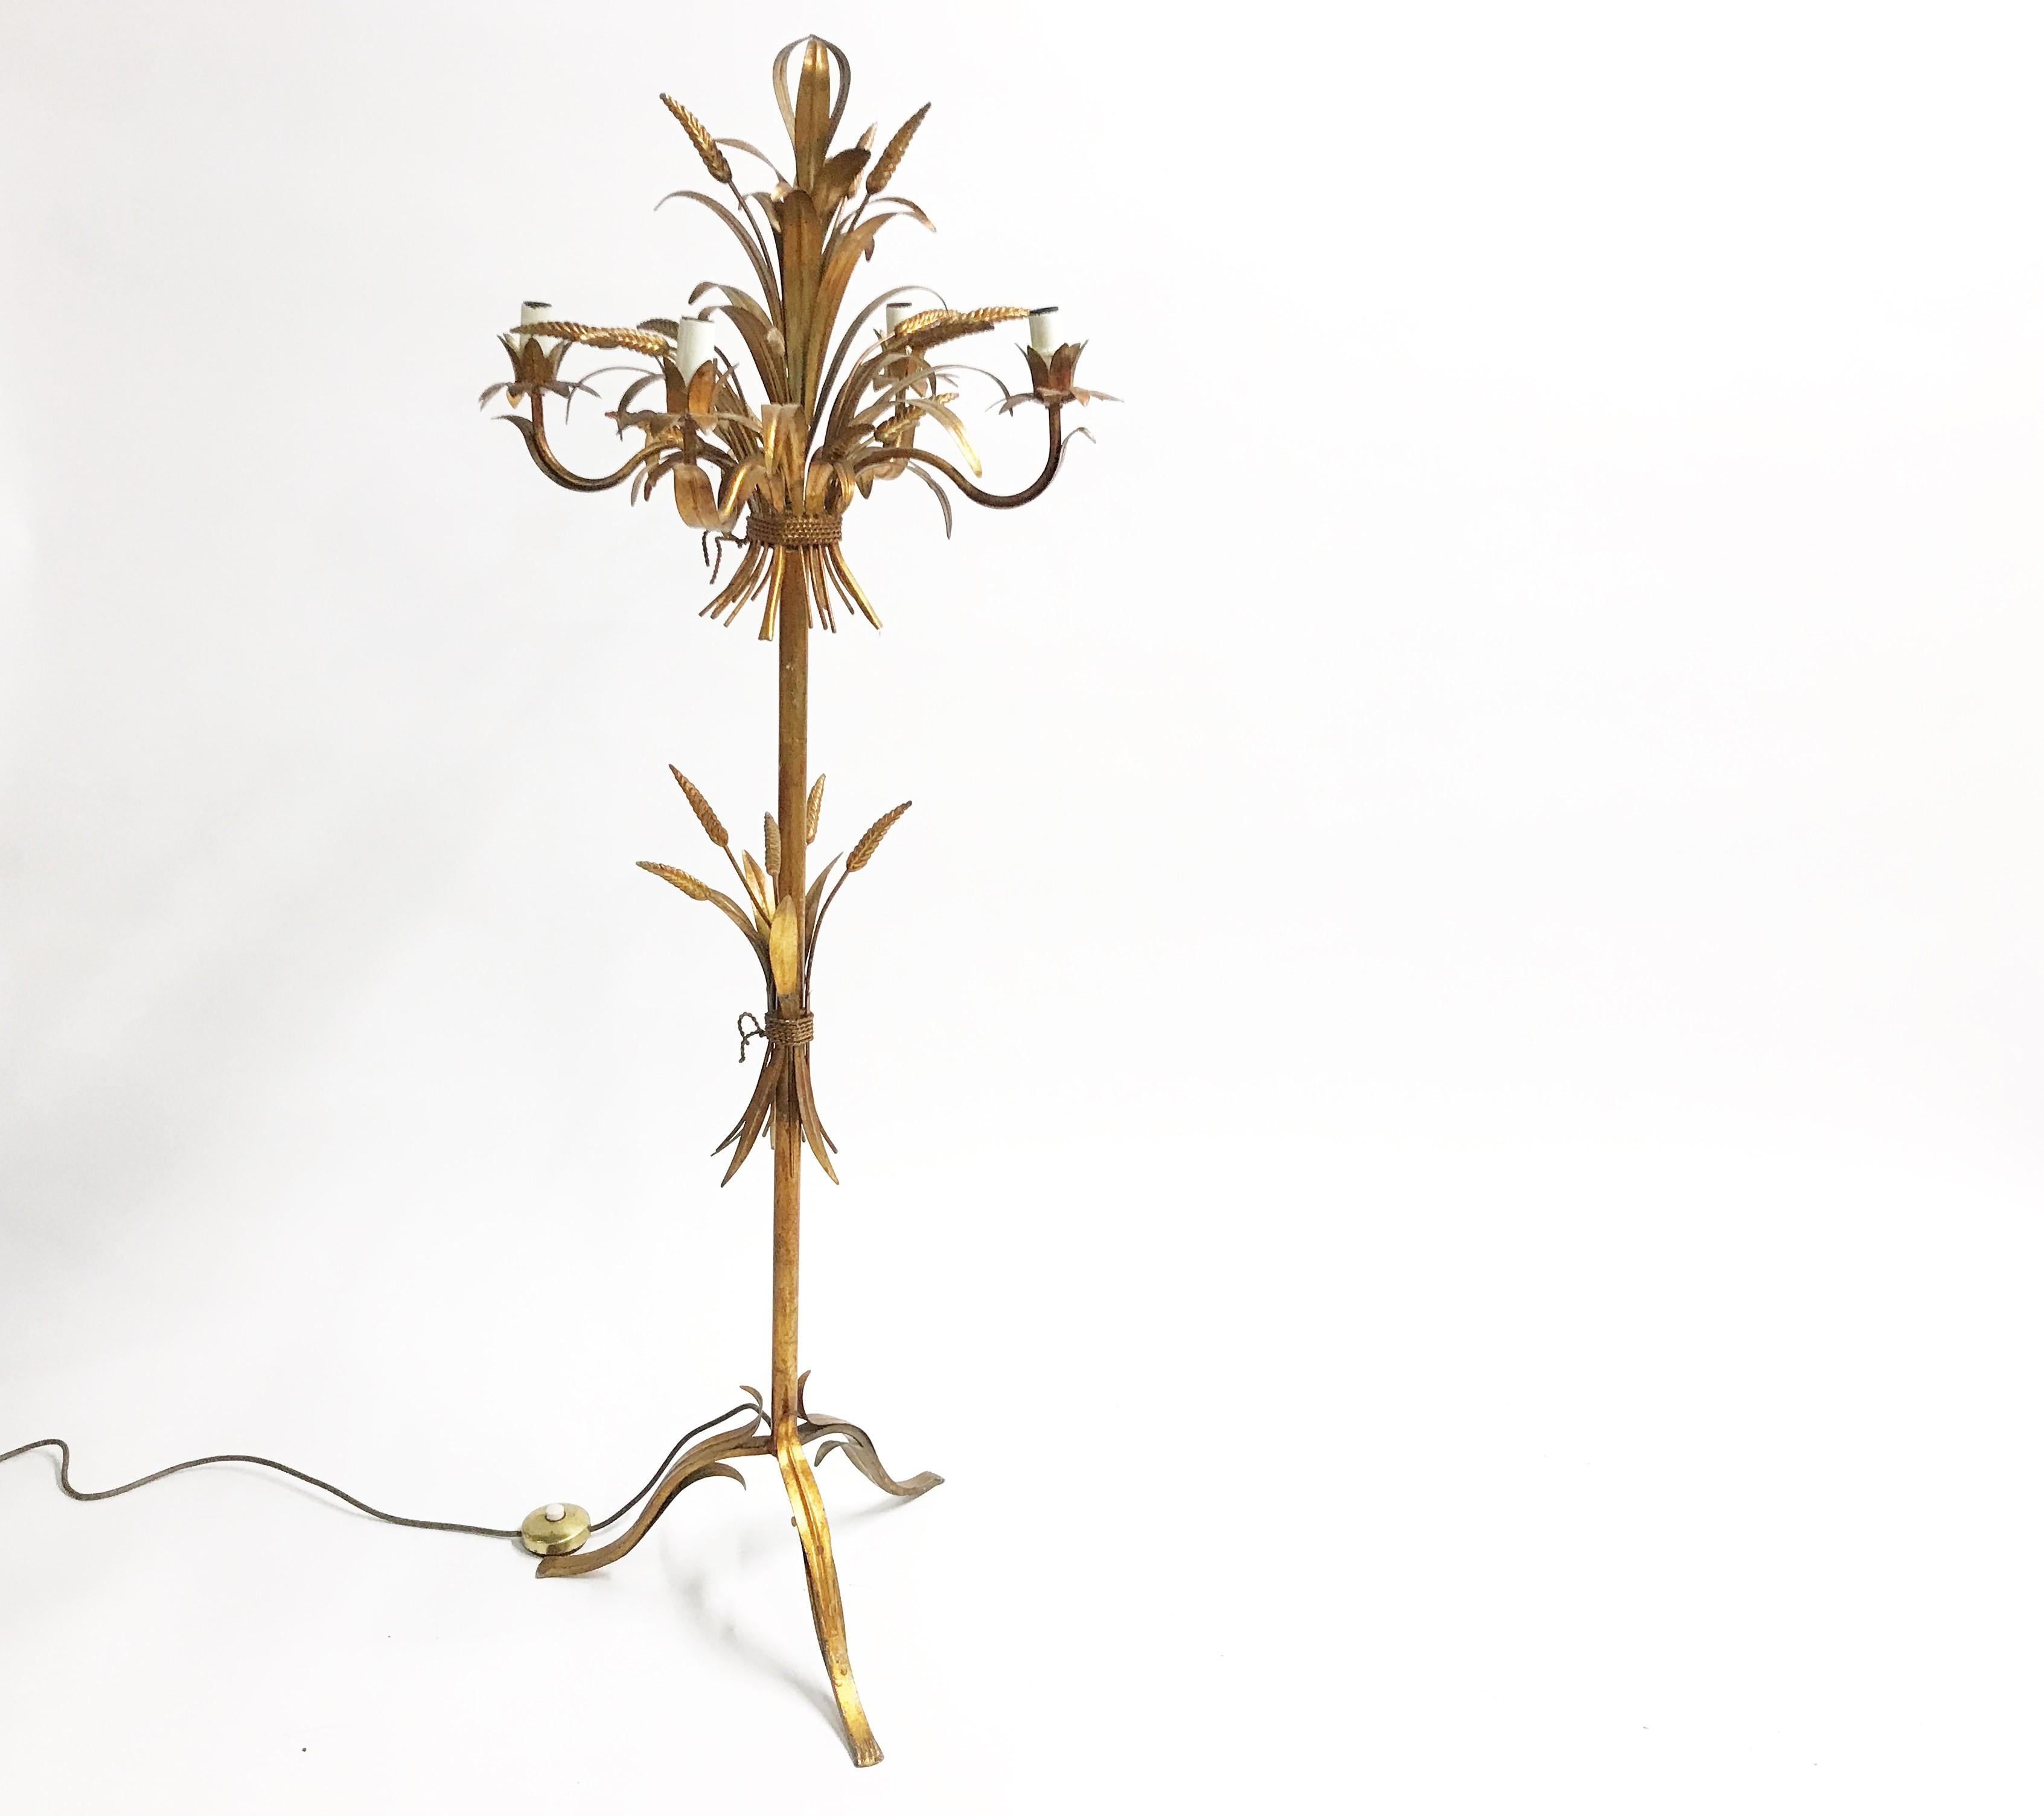 midcentury sheaf of wheat gilt metal floor lamp.

Beautiful and charming floor lamp with four candelabra lightpoints.

Original condition, beautiful patina.

Tested and ready t ouse with 4 small (e14) light bulbs.

1960s -